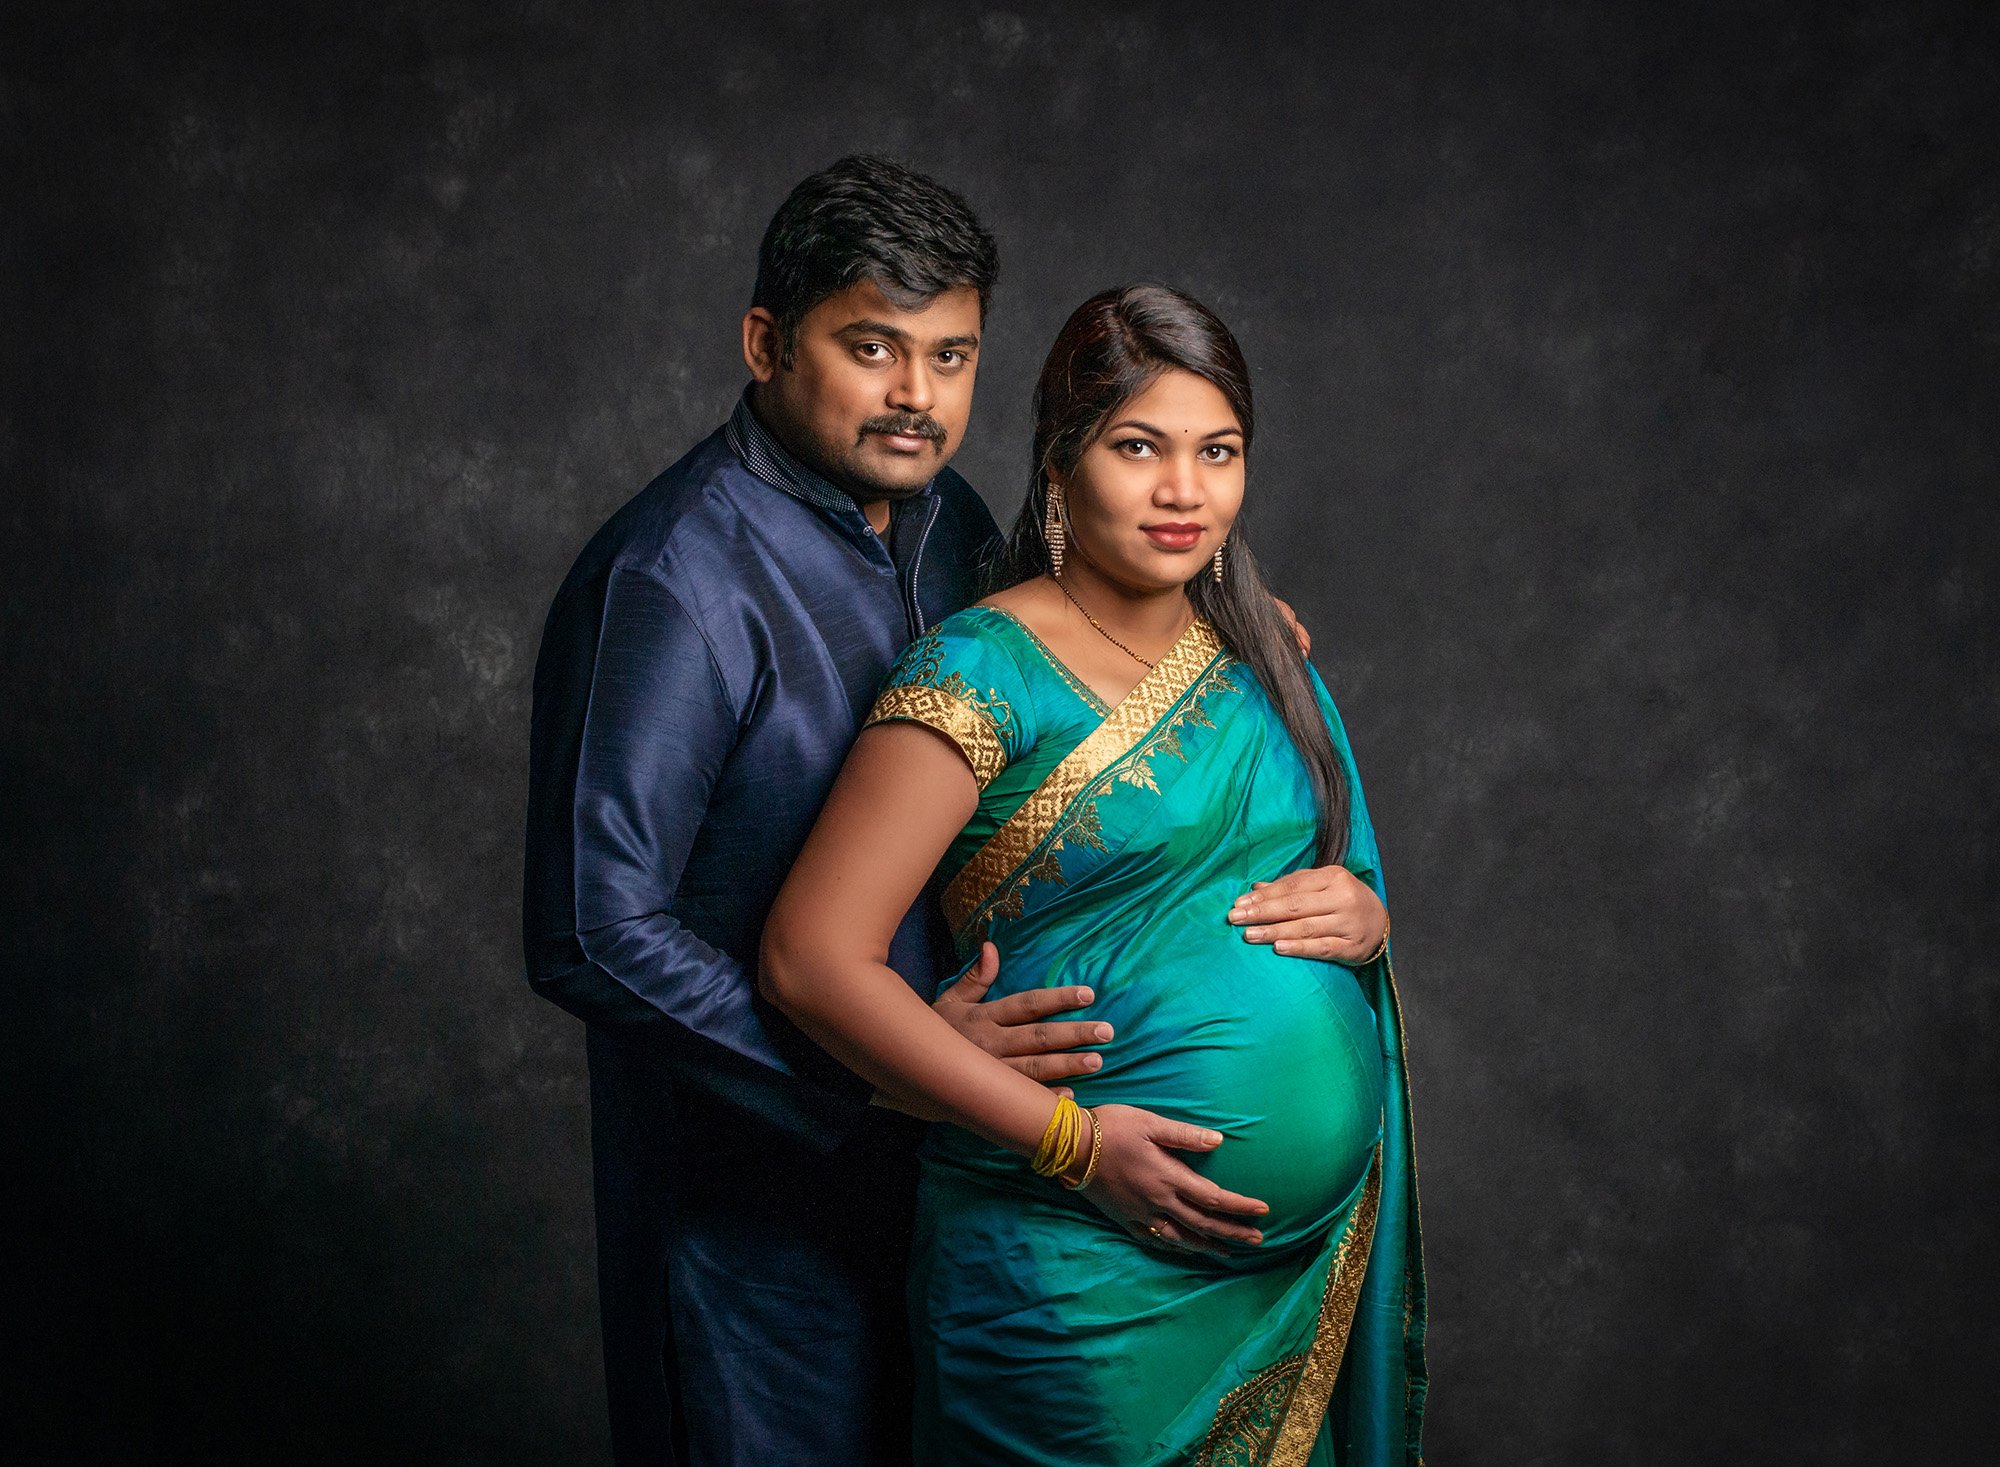 traditional Indian clothes maternity photo pregnant woman posing with husband in Indian dress clothing on gray backdrop